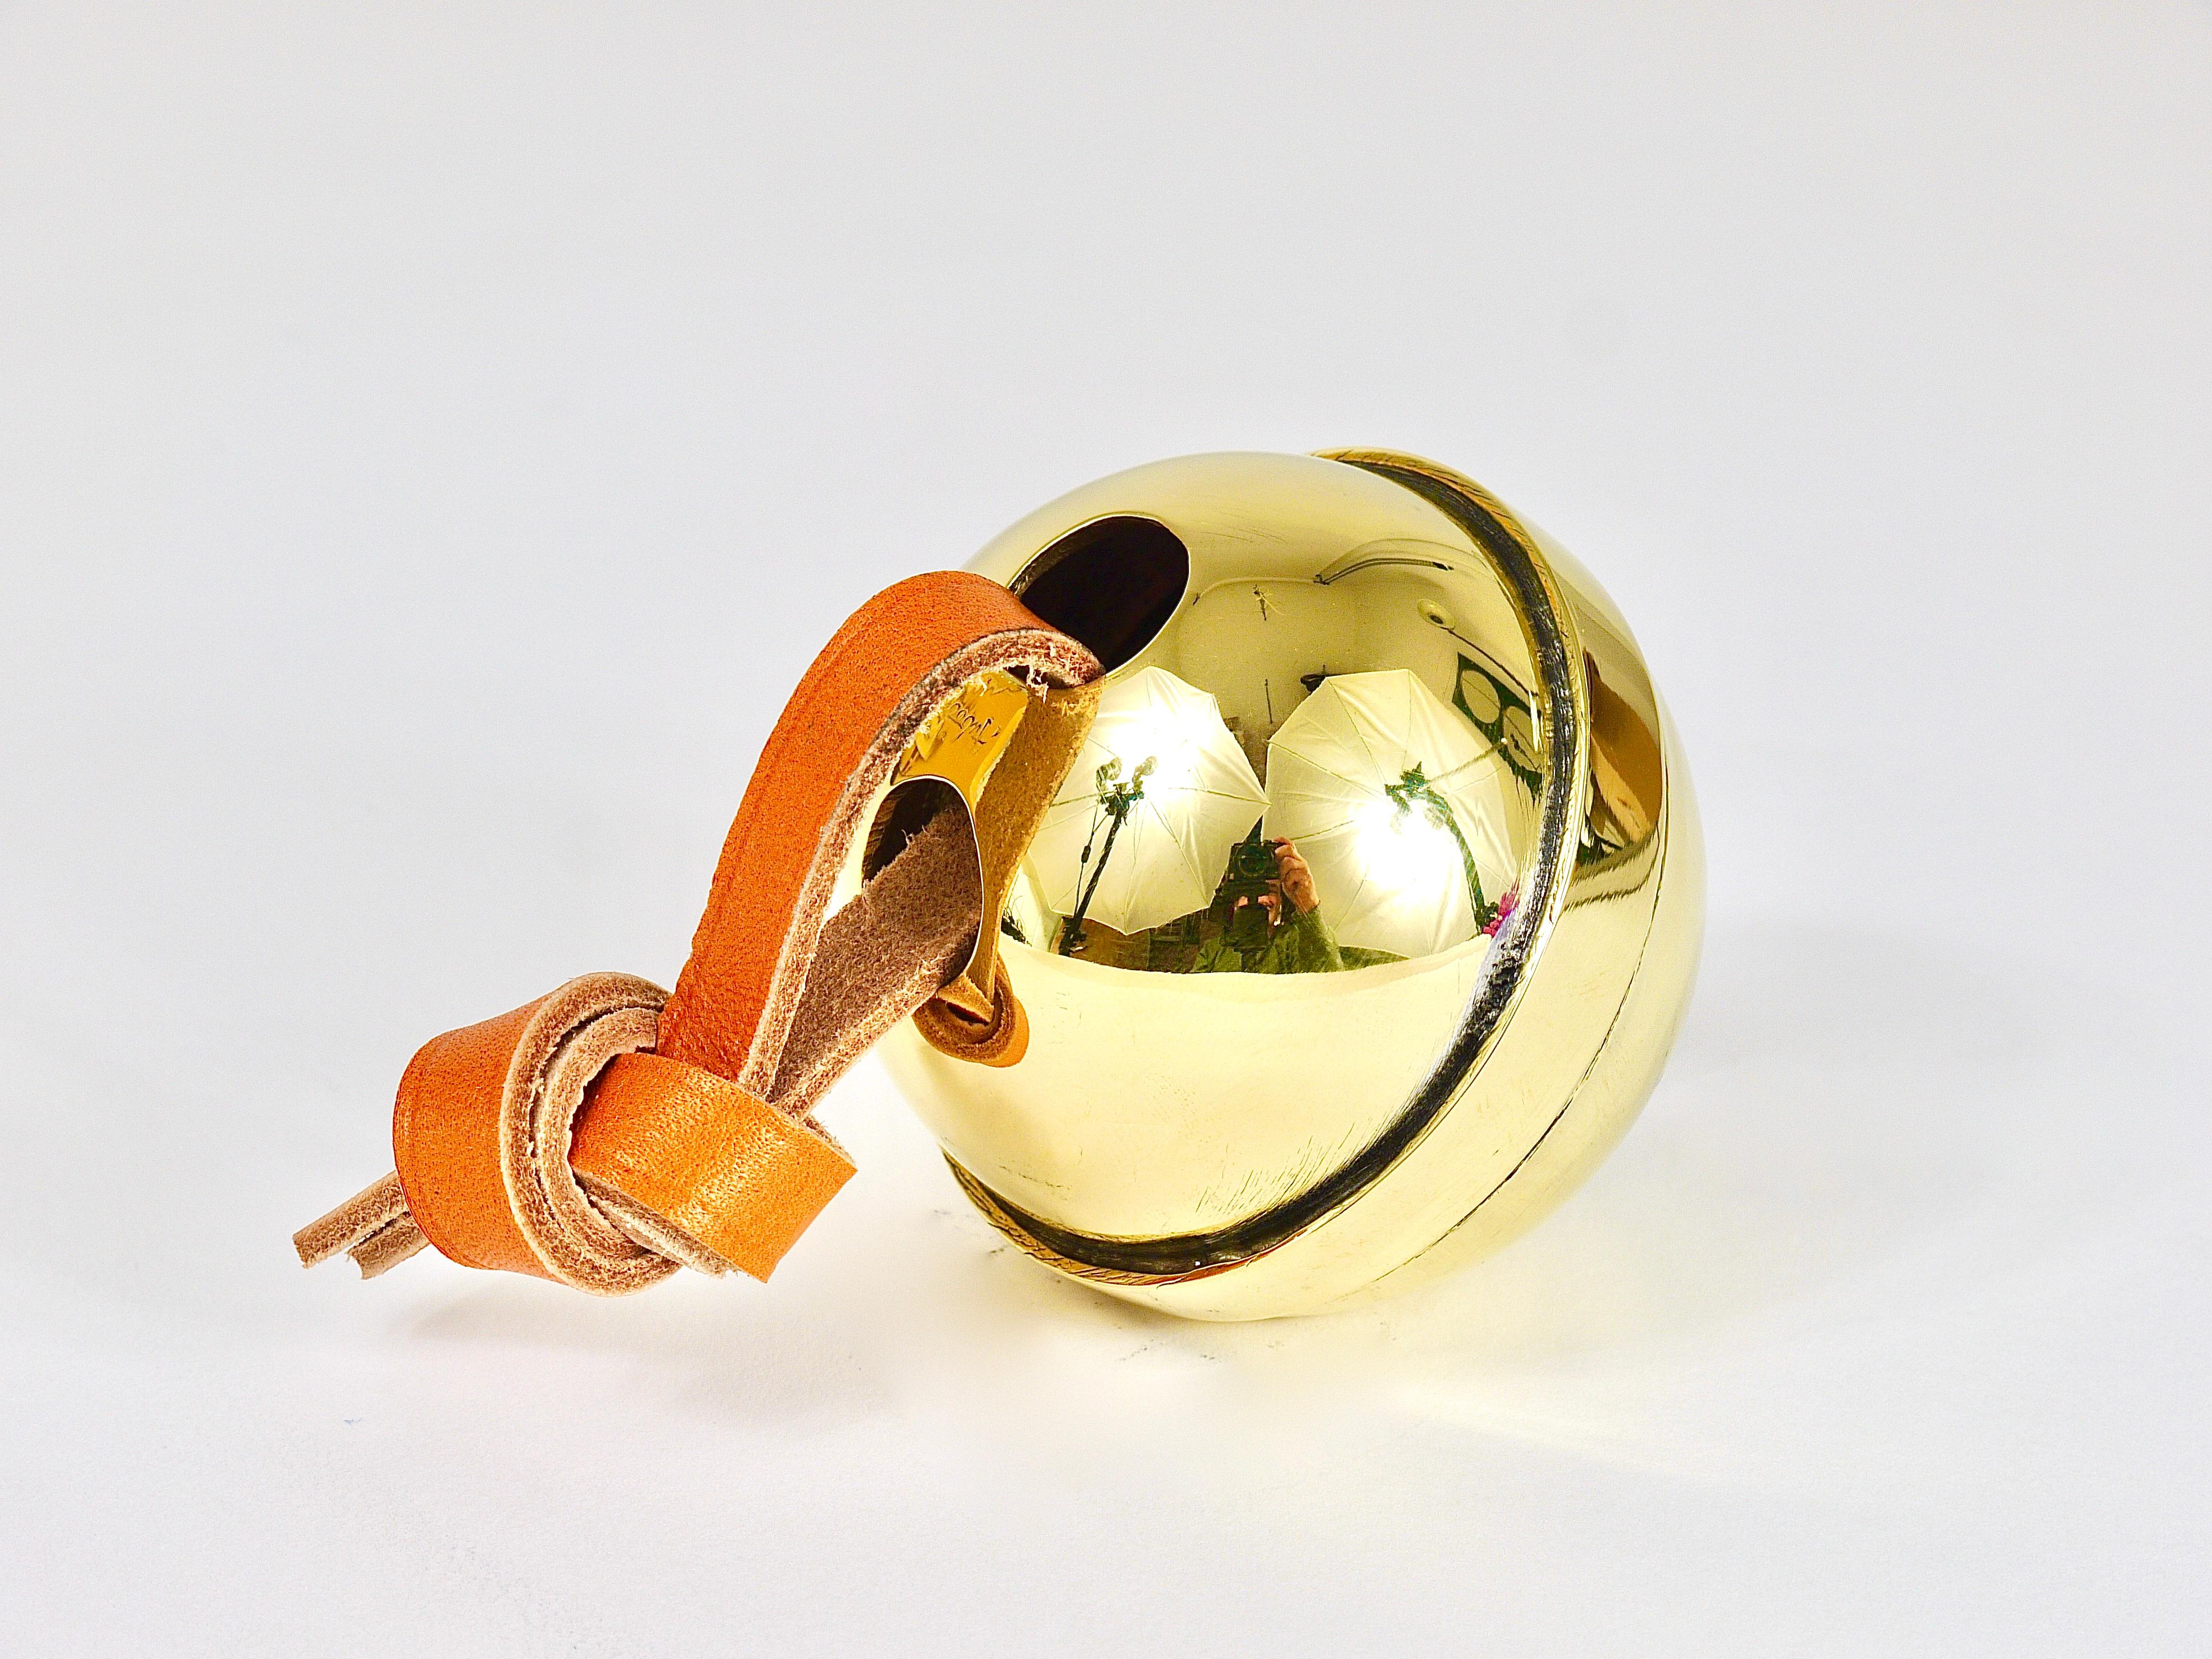 Carl Auböck Handcrafted Paperweight Jingle Bell #5039, Brass, Leather, Austria For Sale 5